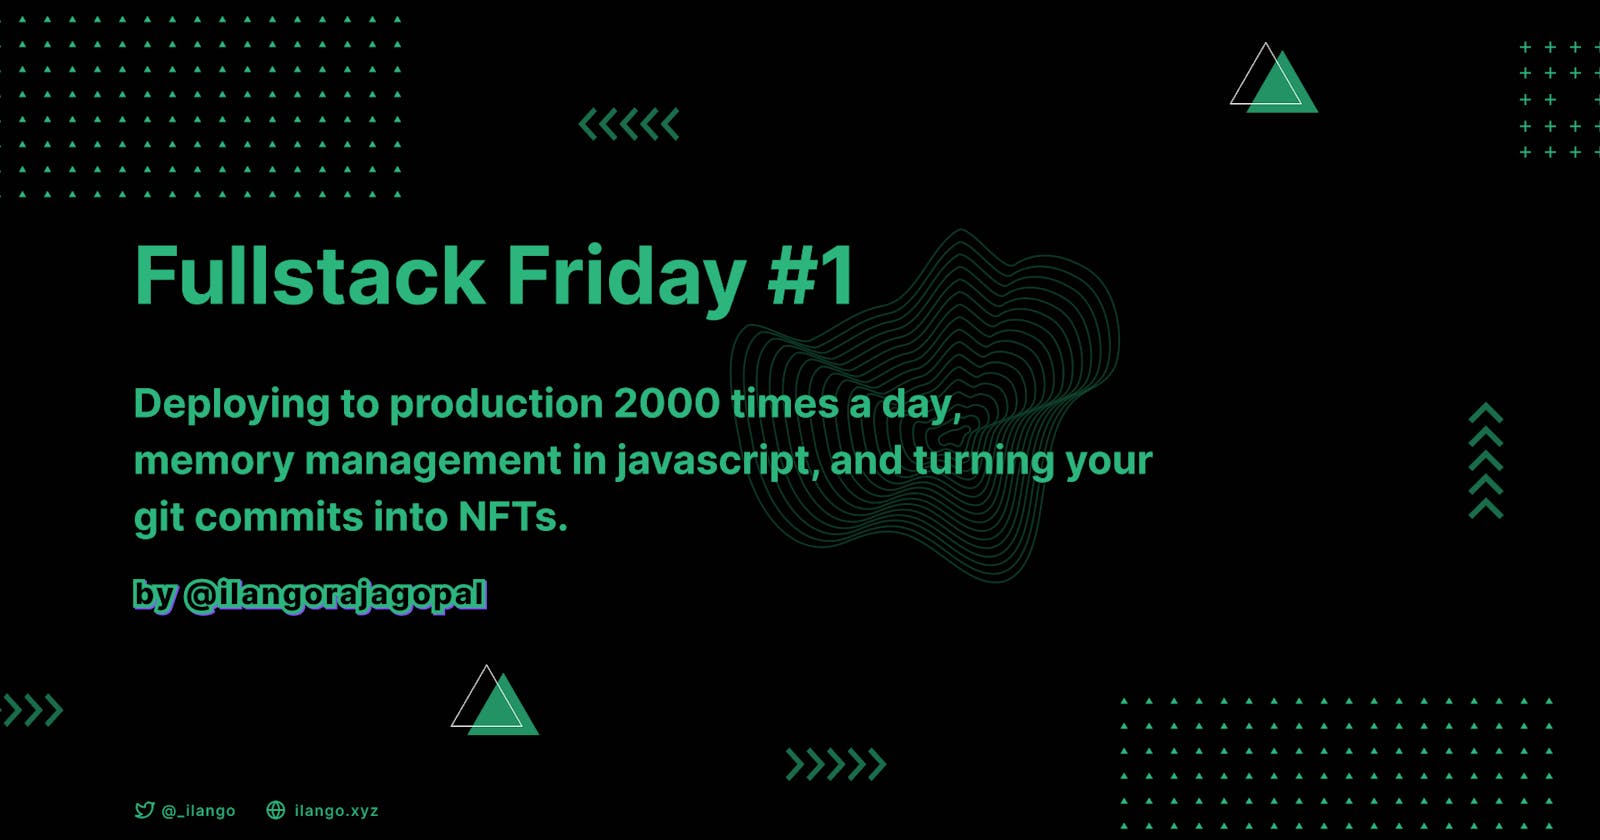 Fullstack Friday #1: Deploying to production 2000 times a day.